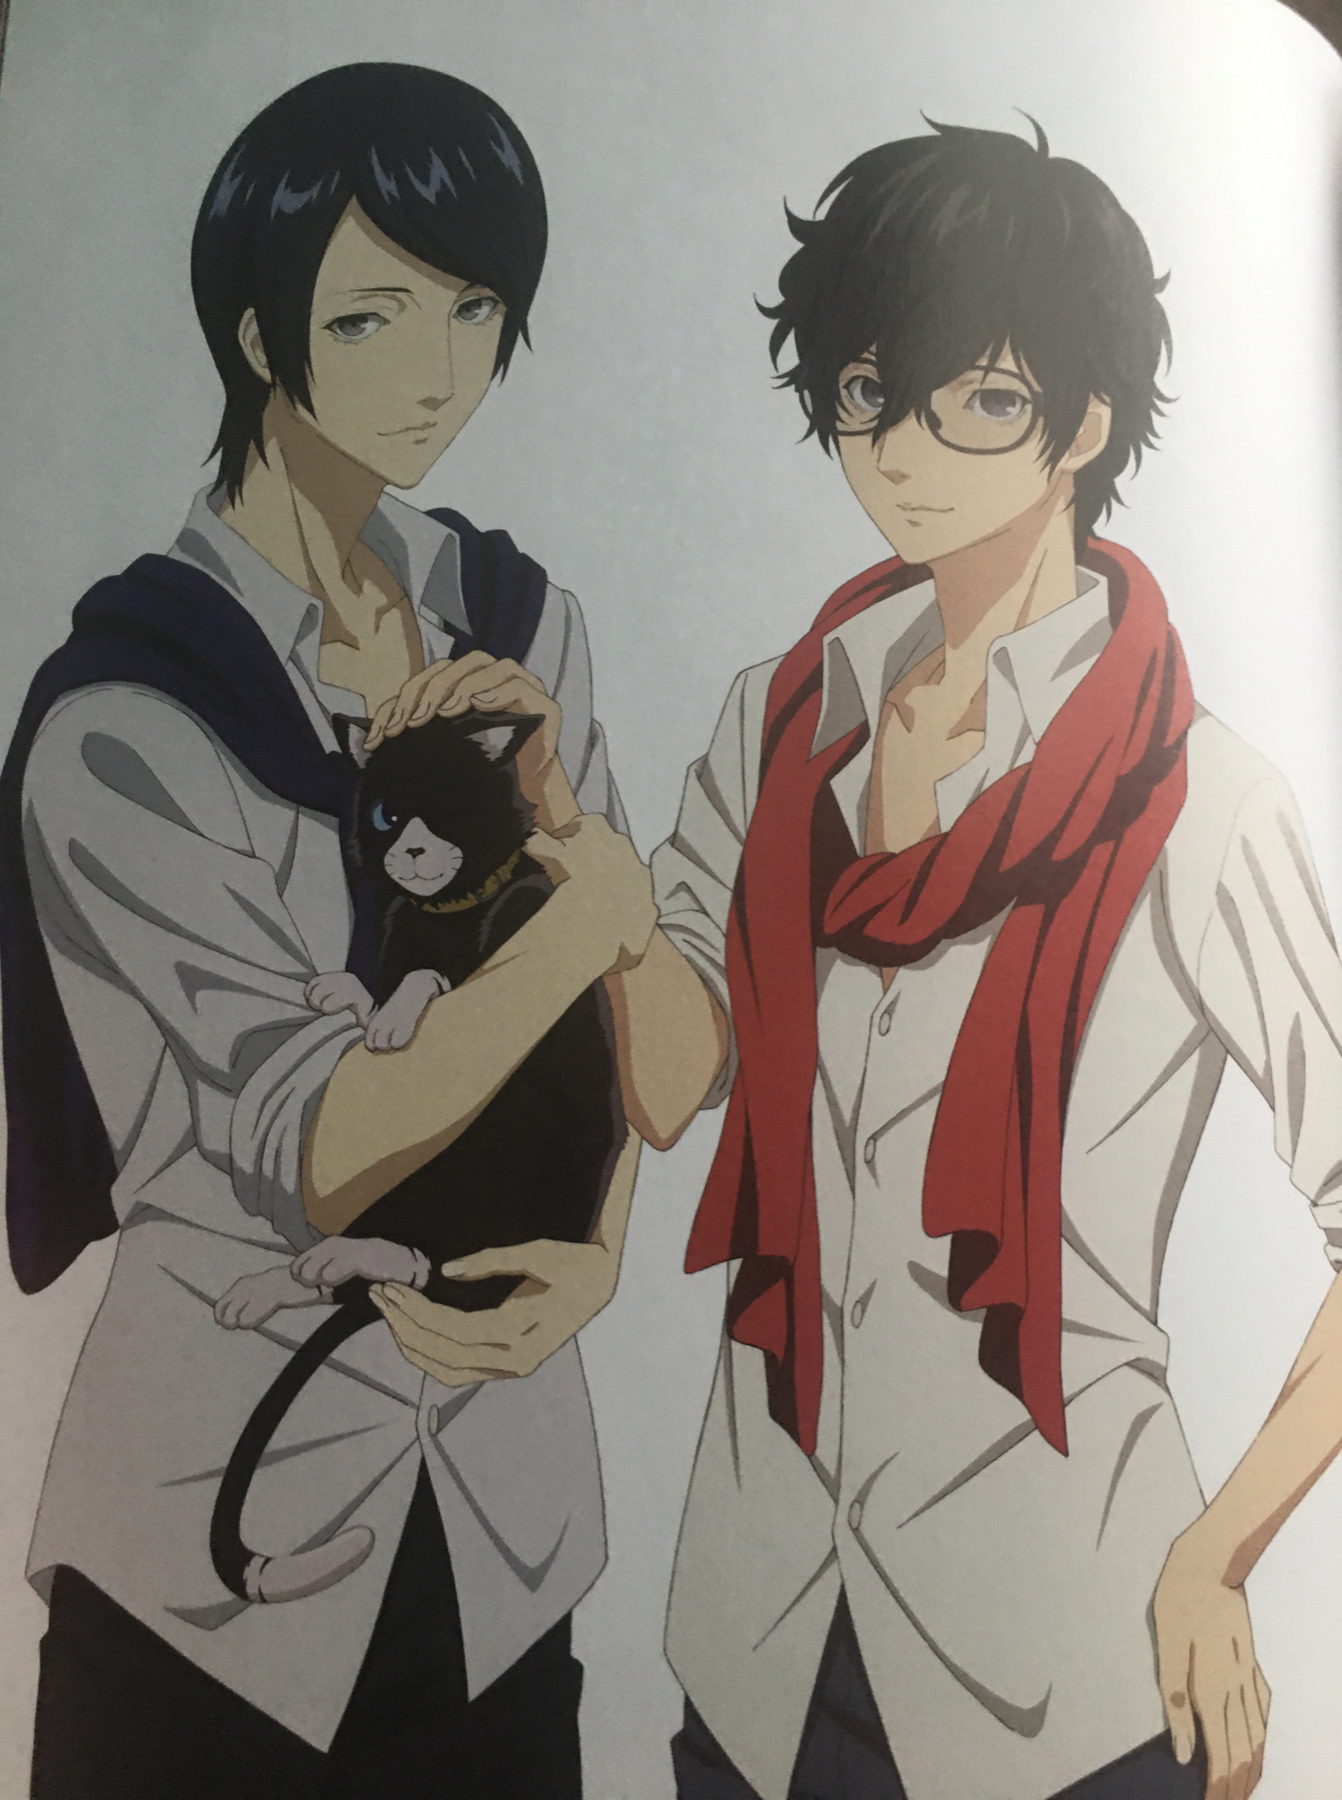 So today I got P5A art book (even though I haven’t watched the anime) and so um... it’s pretty gay 